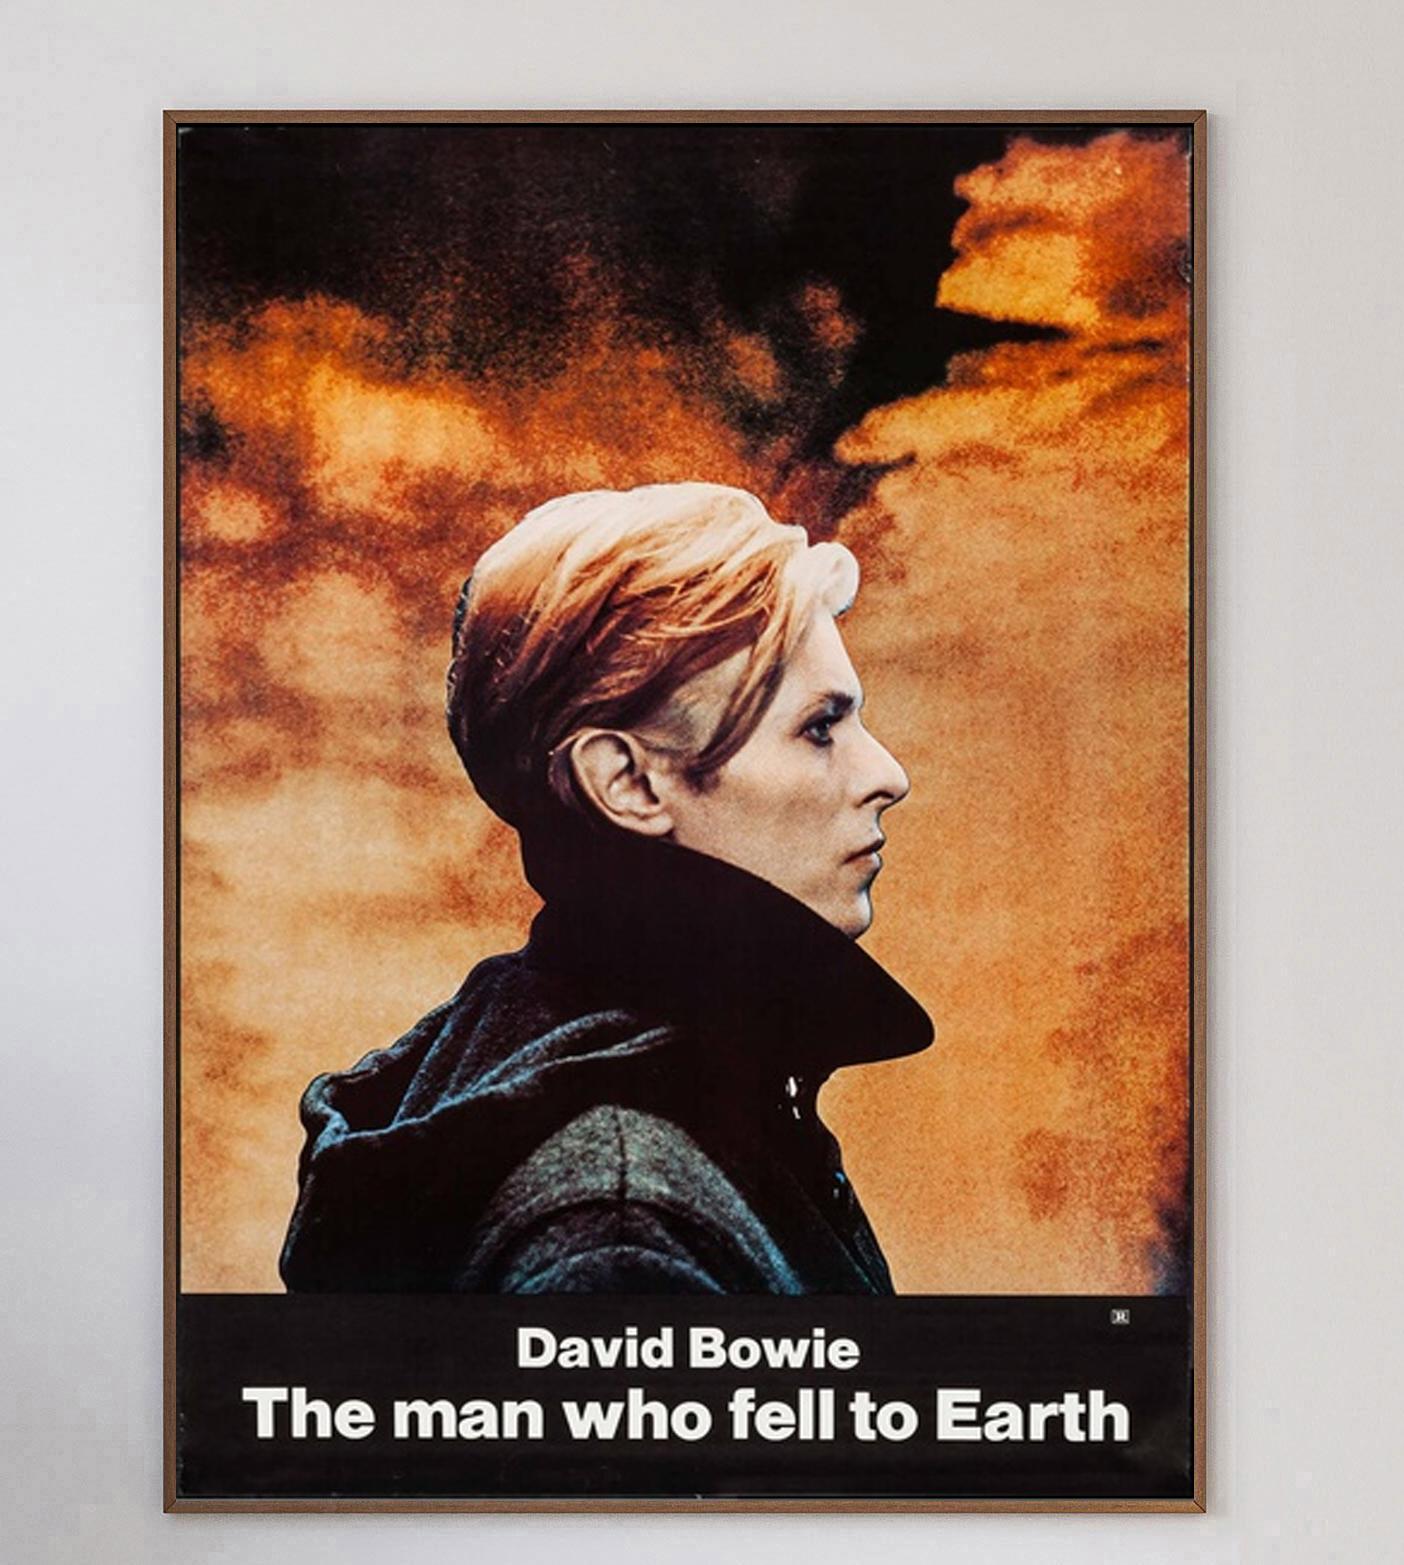 Based on Walter Tevis' novel of the same name, The Man Who Fell To Earth was released in 1976. Directed by Nicholas Reog, the film marked David Bowie's first starring appearance in cinema and continues to this day to have a large cult